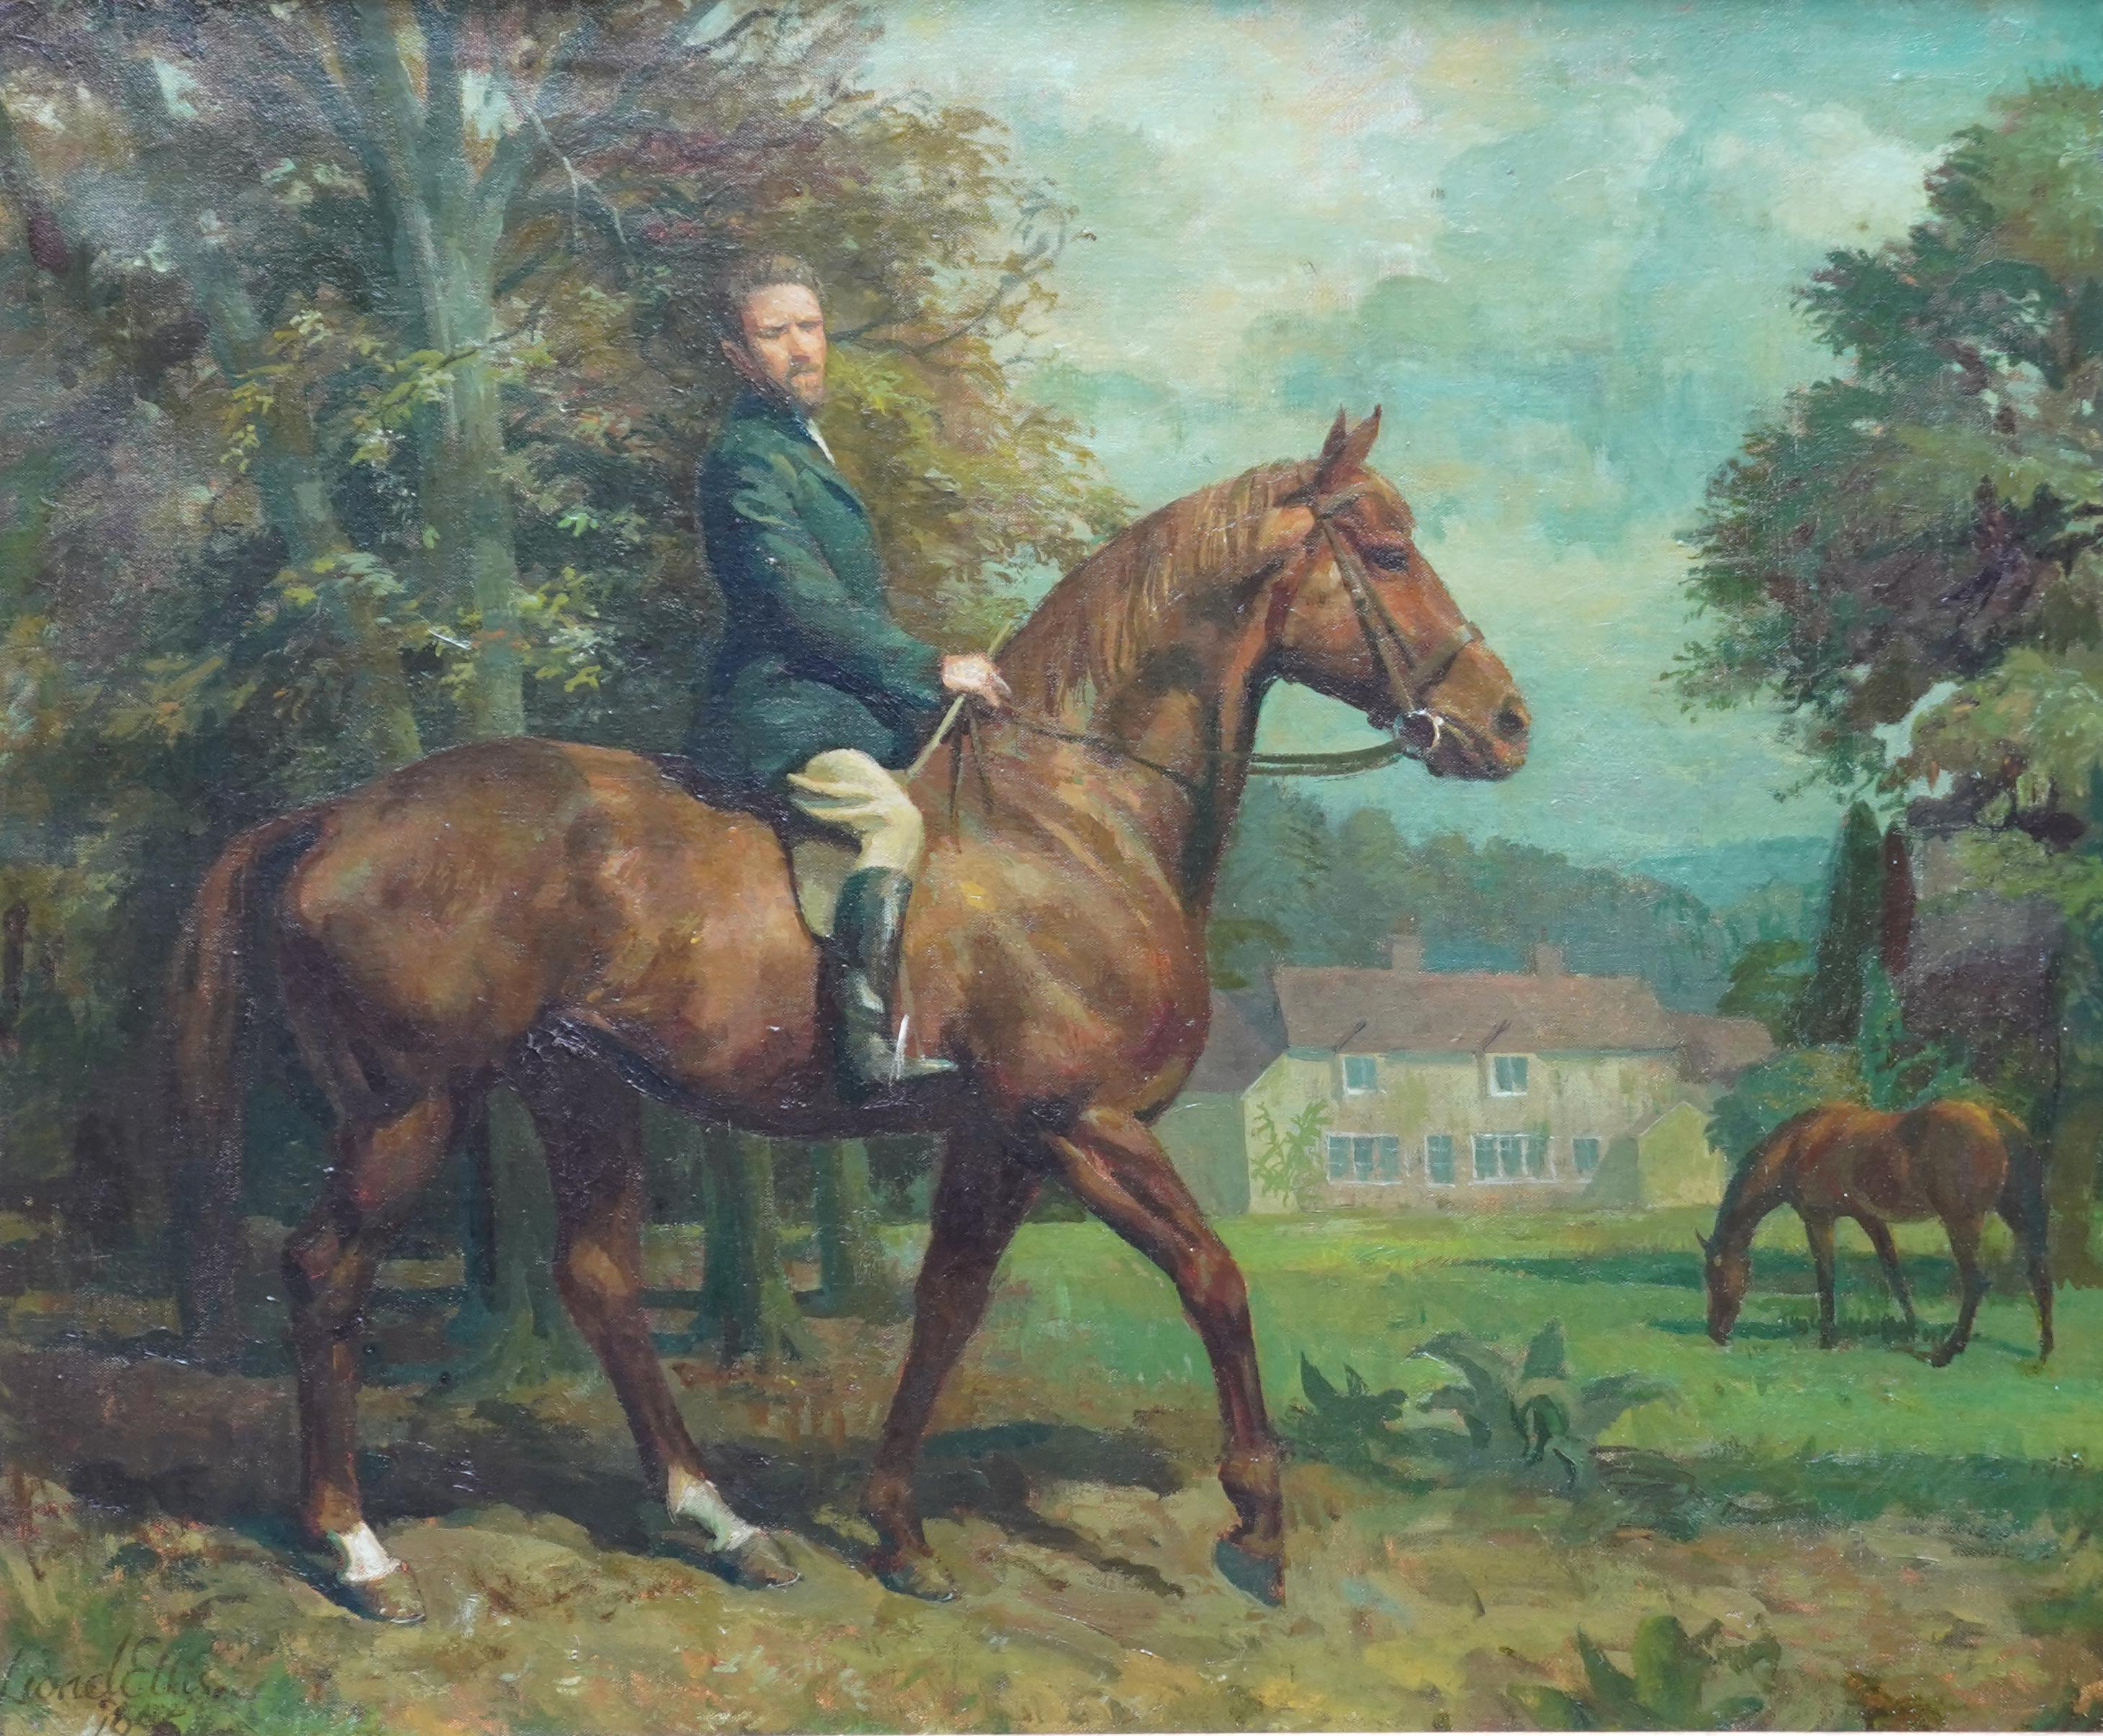 Self Portrait on Horse in Landscape - British 50's art equine rider oil painting For Sale 3